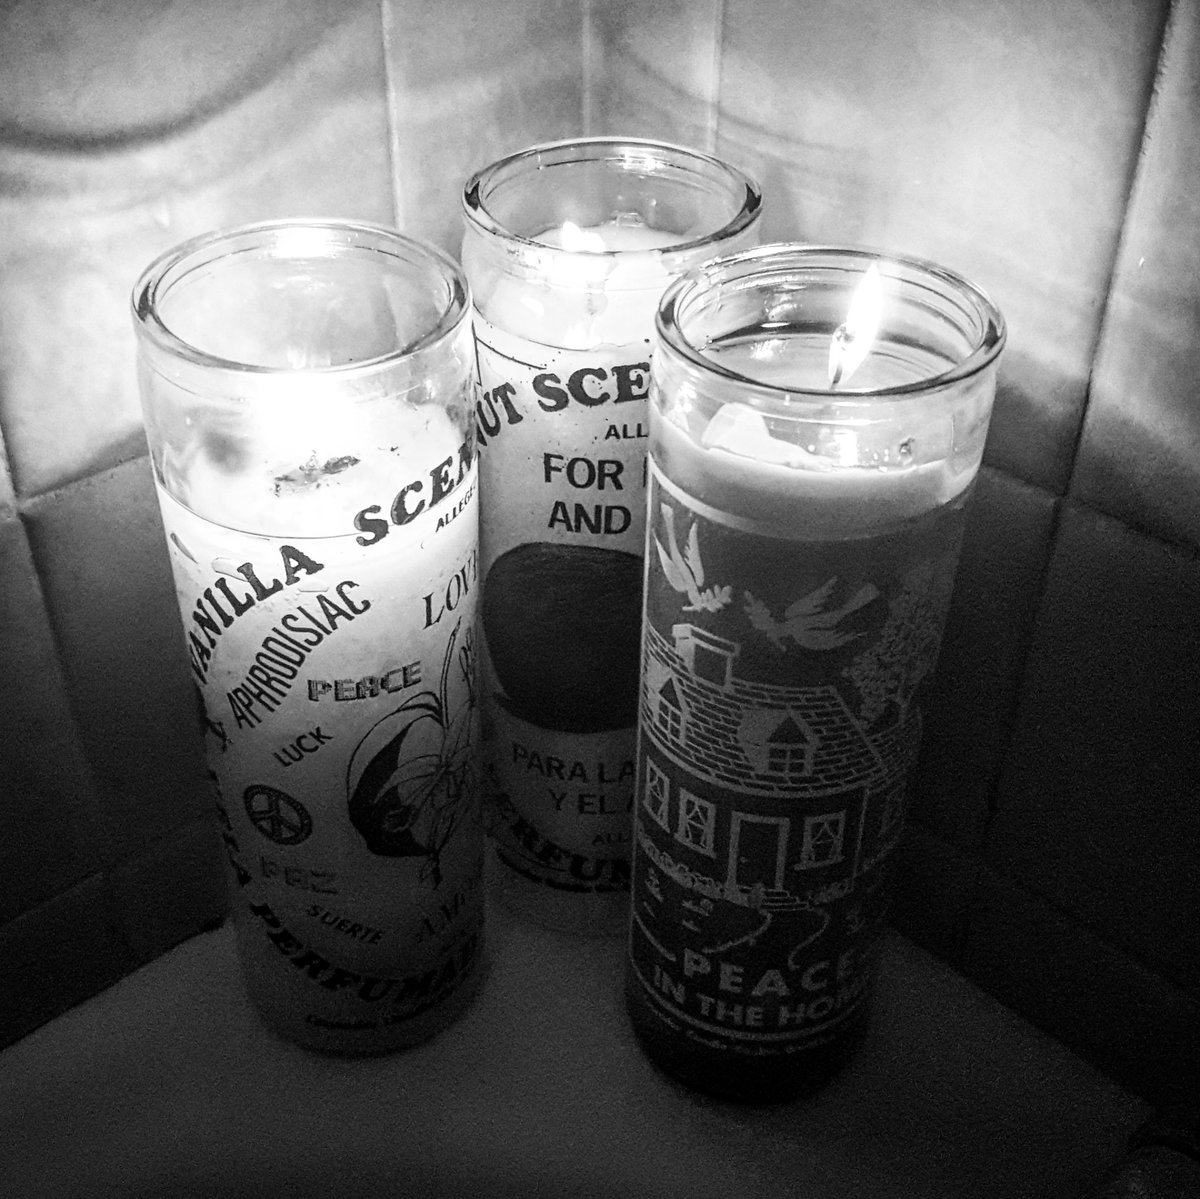 🕯🕯🕯 Trying to relax. 🕯🕯🕯

#bath #candles #enchantments #enchantmentsnyc #occultstore #nycshop #peace  #peaceful #blackandwhite #sadness